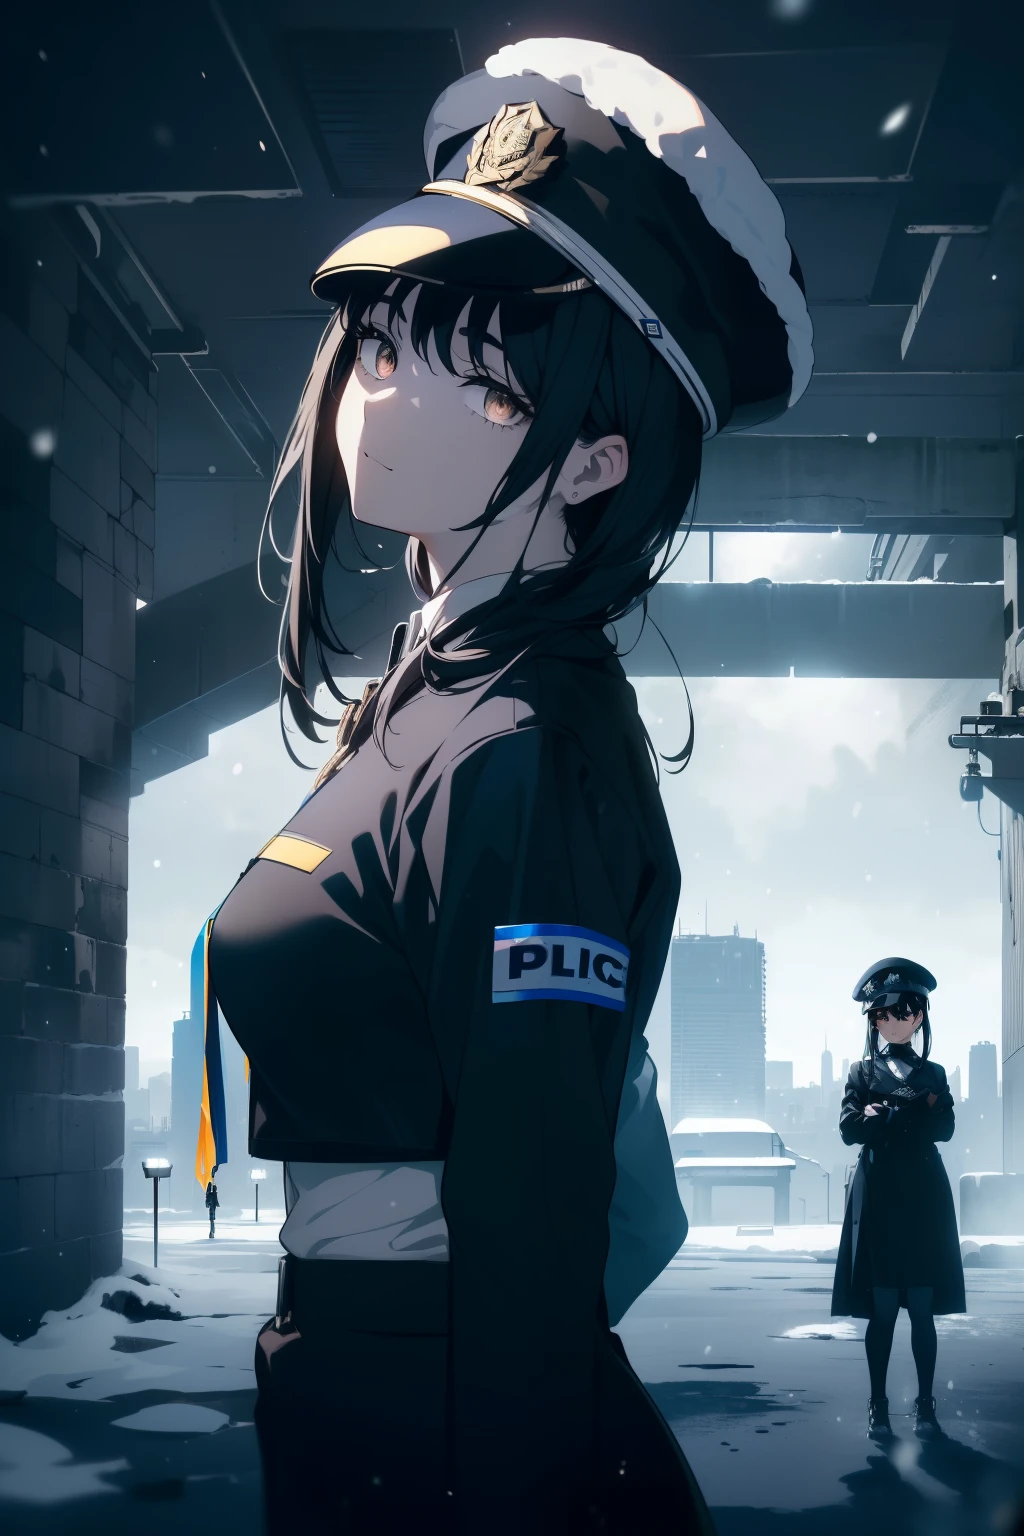 ((Obra maestra, La mejor calidad, ultrahigh resolution)), (((2girls))), standing next to each other, confidant stance, (((((two police officers, wearing blue police uniforms, police uniforms)))), (((wearing beat cop hat))), (black, black beat cop hat), (((black hair, dark black hair))), long hair cut, pale skin, ((brown eyes)), glowing_eyes, neon eyes, (ultra detailed eyes:0.7, beautiful and detailed face, detailed eyes:0.9), ((centered)), smile, ((wide shot)), facing viewer, eye level, ((vibrant background, snowy landscape, cityscape, snowing, snow)), flat chested, looking at viewer, ((half closed eyes)), ((perfect hands)), ((head:1, armored arms, hips, elbows, in view:1)), (((hands behind back))), empty eyes, beautiful lighting, outside, outdoors, background, defined subject, (25 years old), (head tilt), (((epic))), (((cool))), ((shaded face))